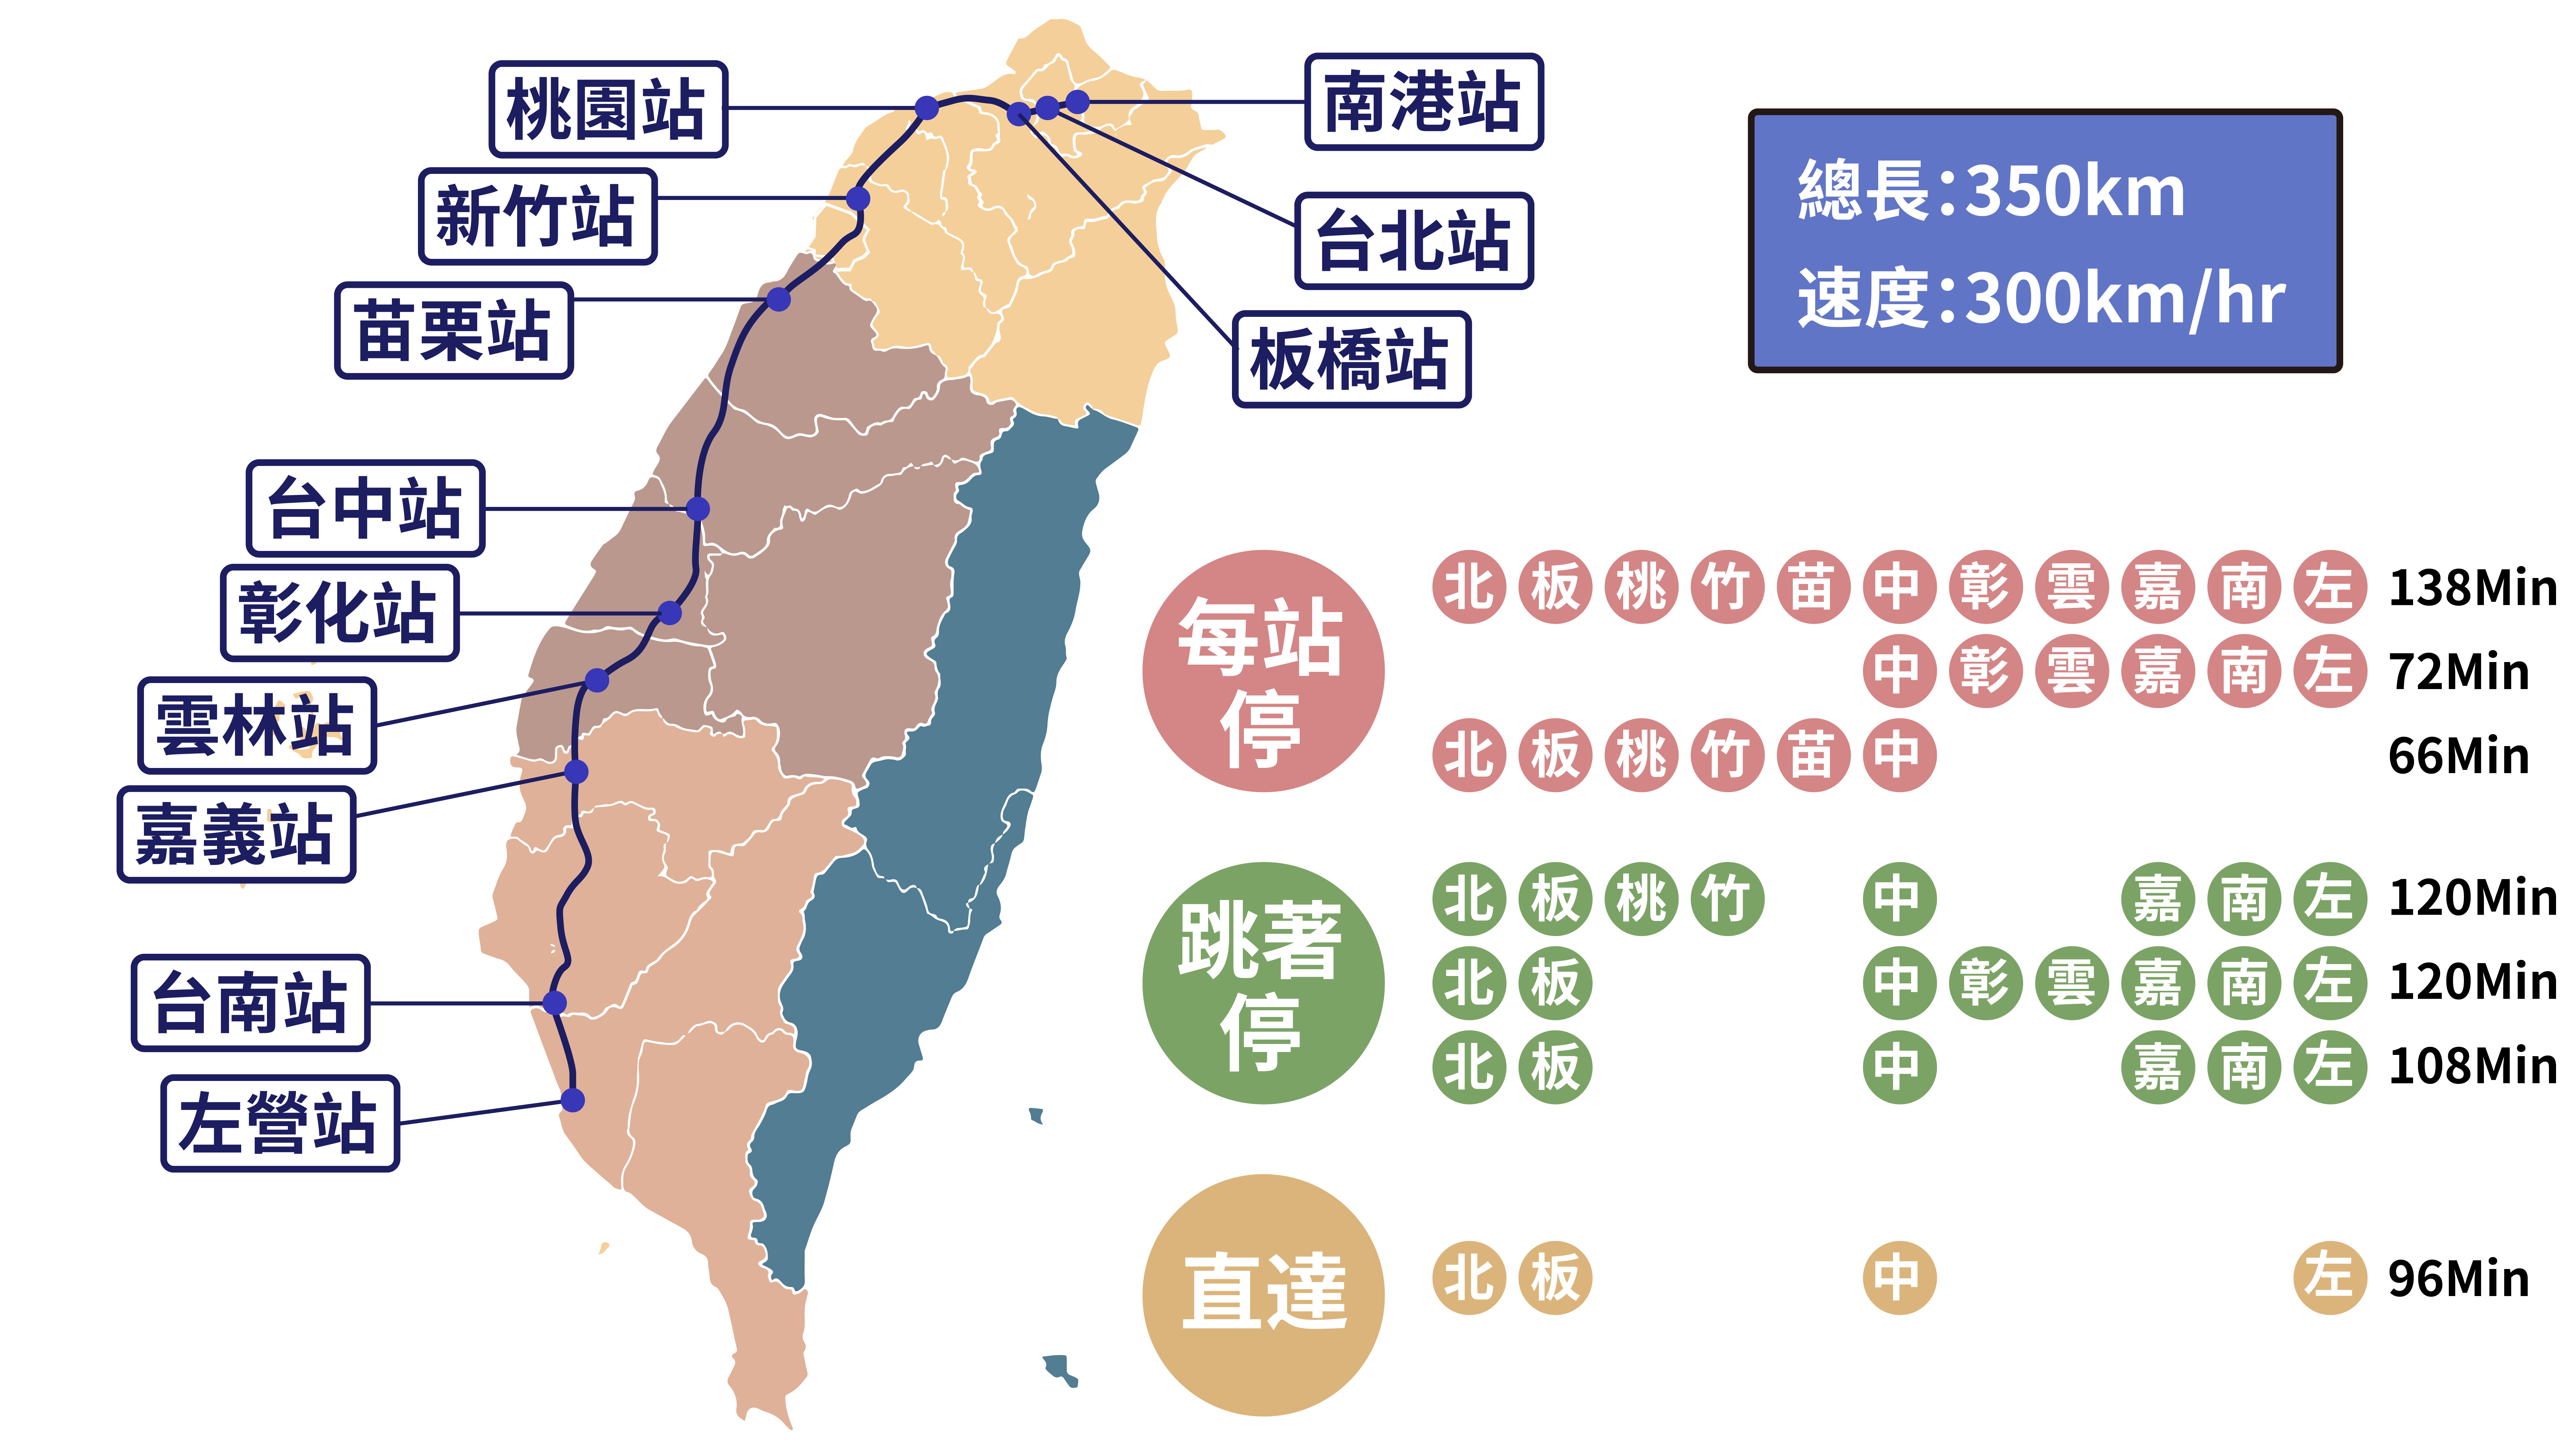 Taiwan High Speed Rail complete information-Route map, ticket price, booking